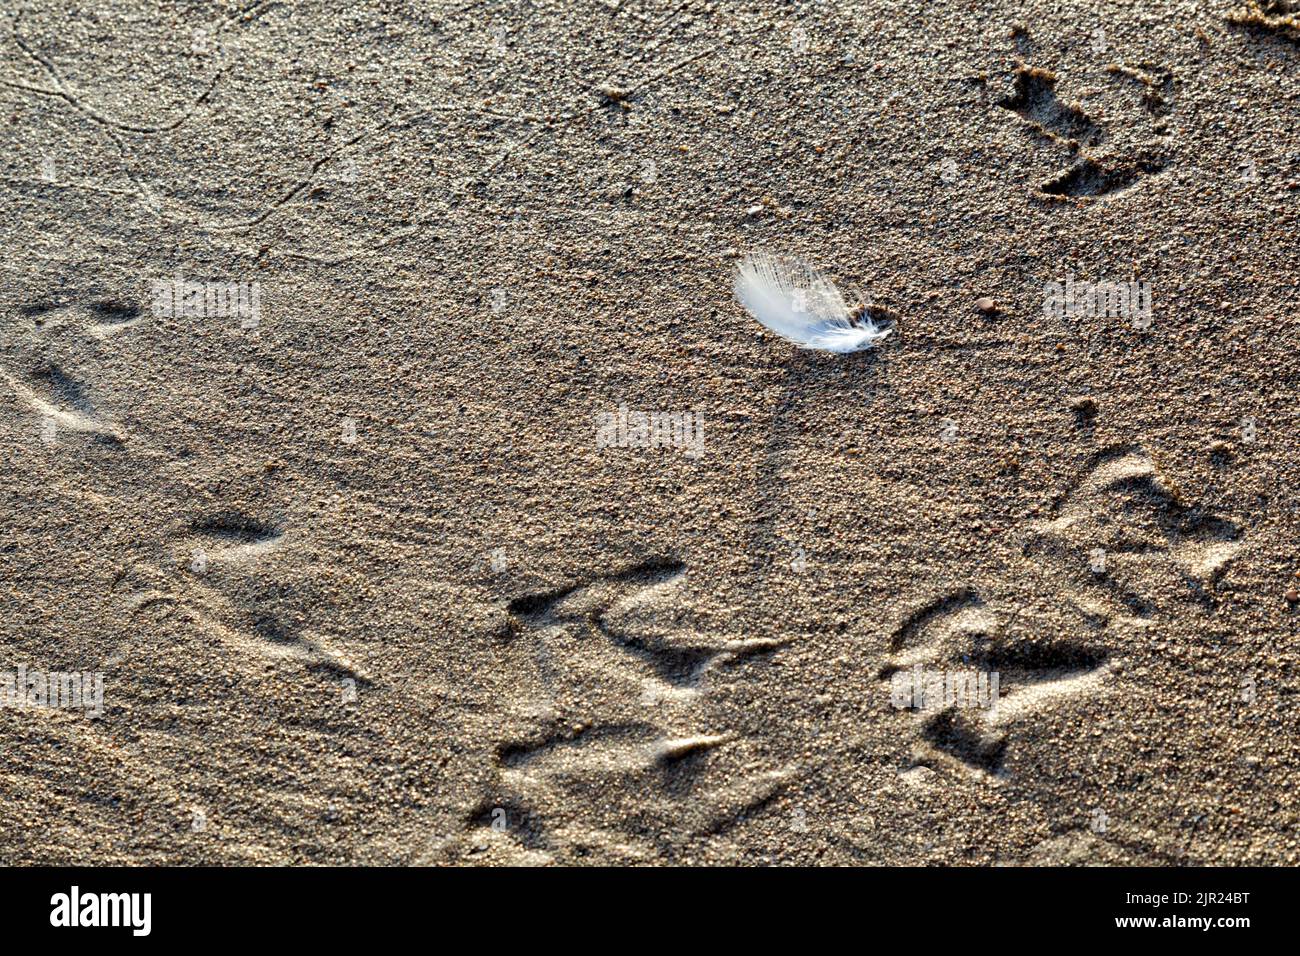 A white feather seen in morning light lying on a coarse sand beach surrounded by seagull footprints and sandworm tracks Stock Photo